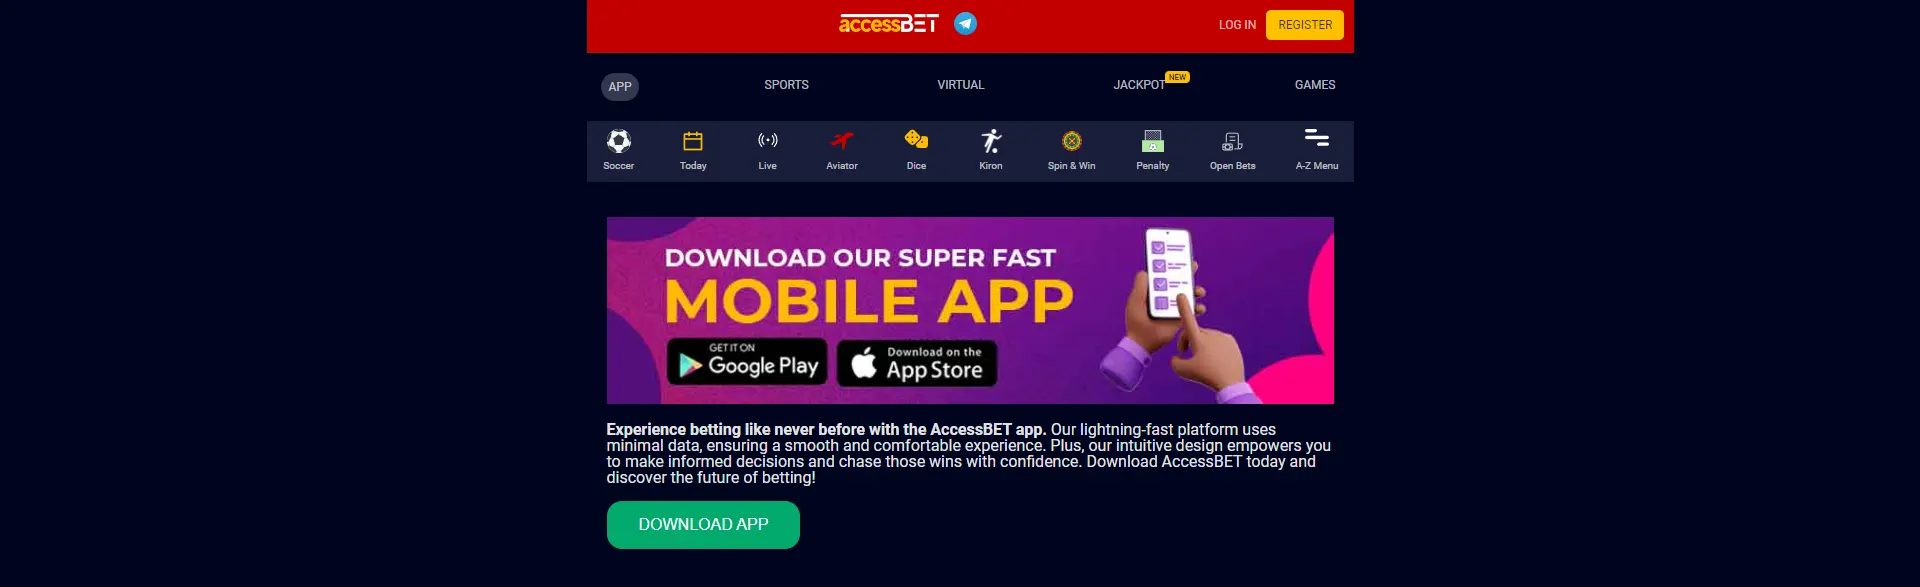 Page with app for Android and iOS mobile devices on AccessBET.